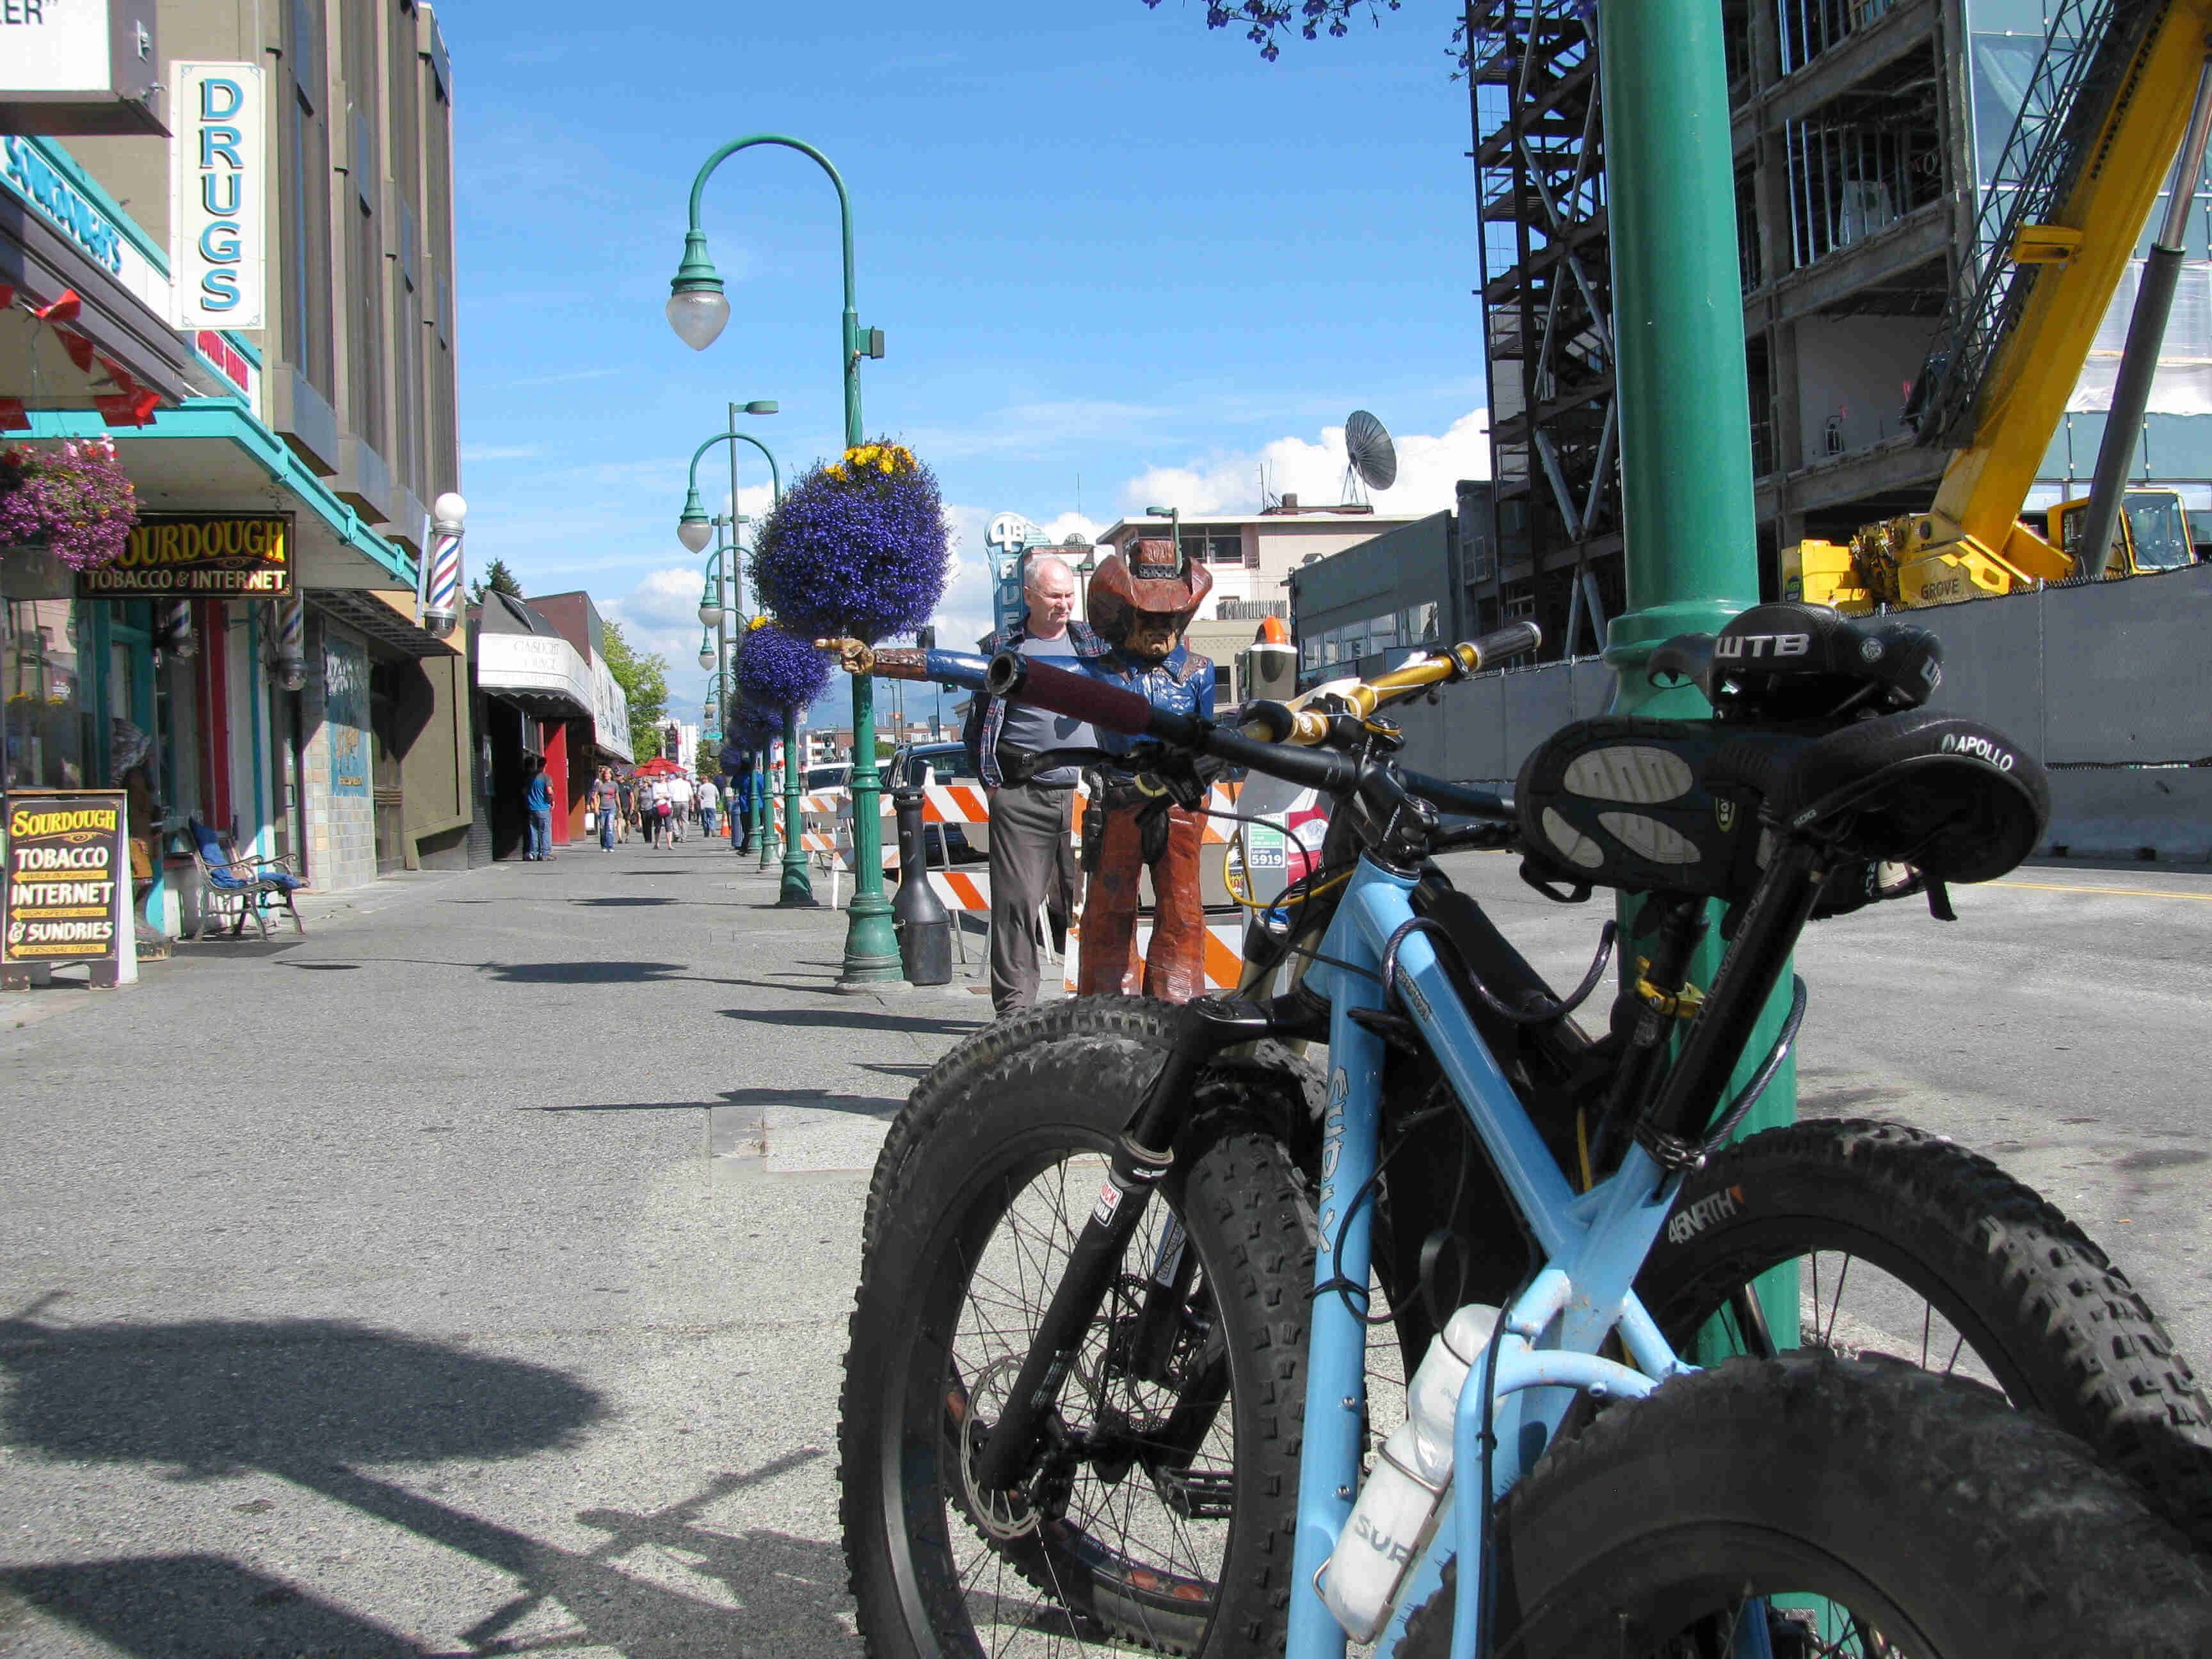 Rear, left side view of 2 Surly fat bikes, parked side by side, against a light pole on a sidewalk with city shops